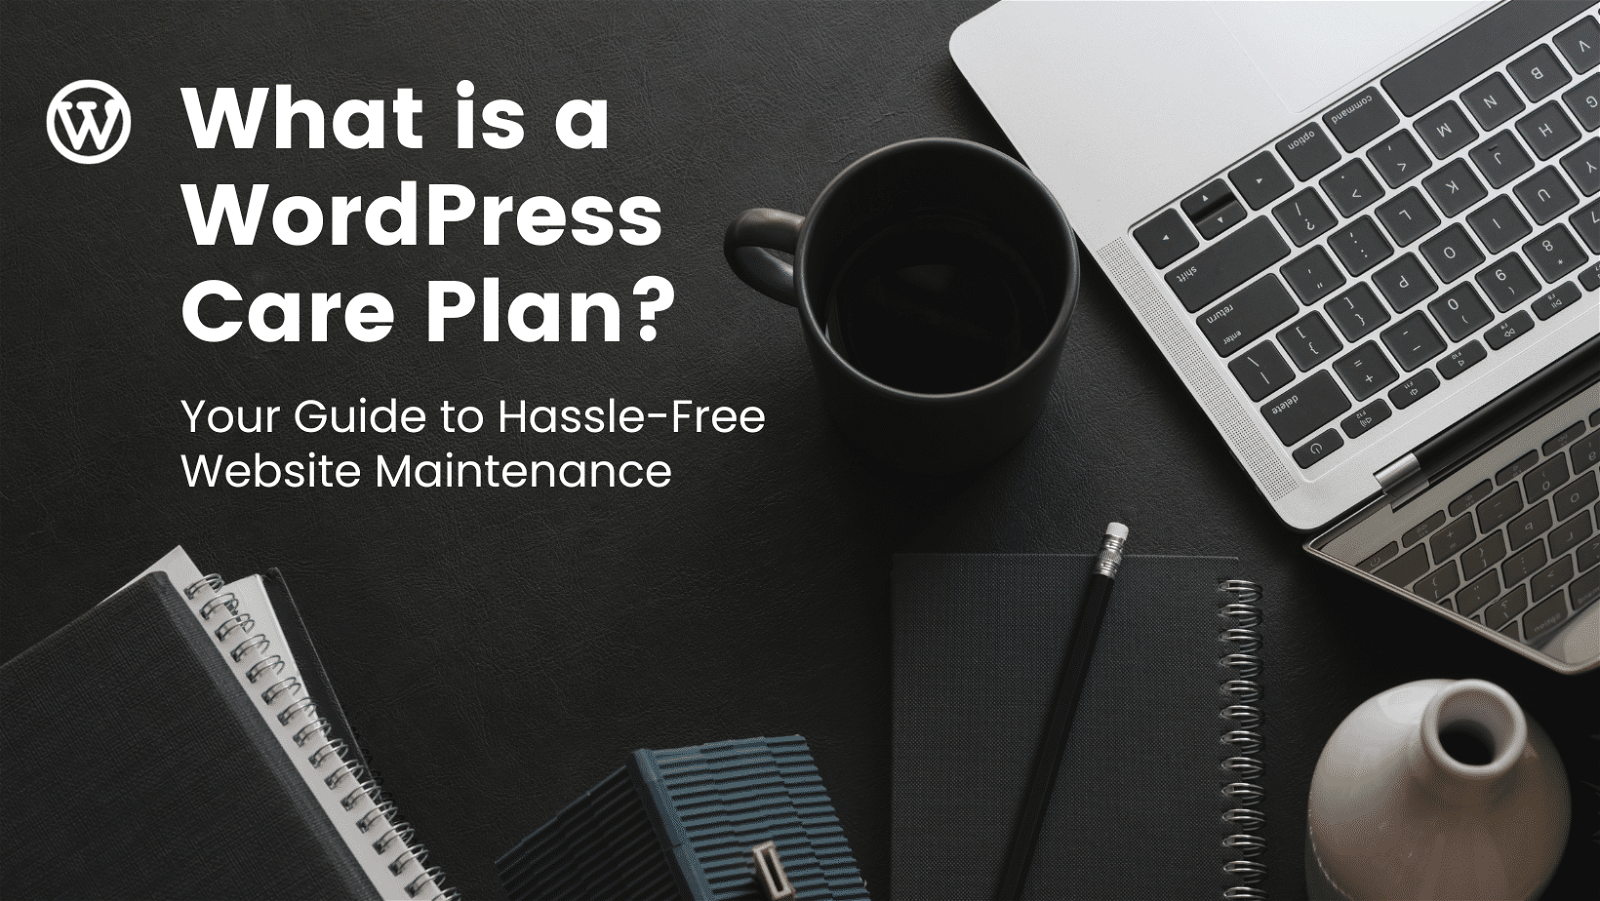 A WordPress Care Plan is a comprehensive service package that focuses on the maintenance and support of a WordPress website. These plans include regular updates, backups, security enhancements, and performance optimizations to ensure the smooth functioning